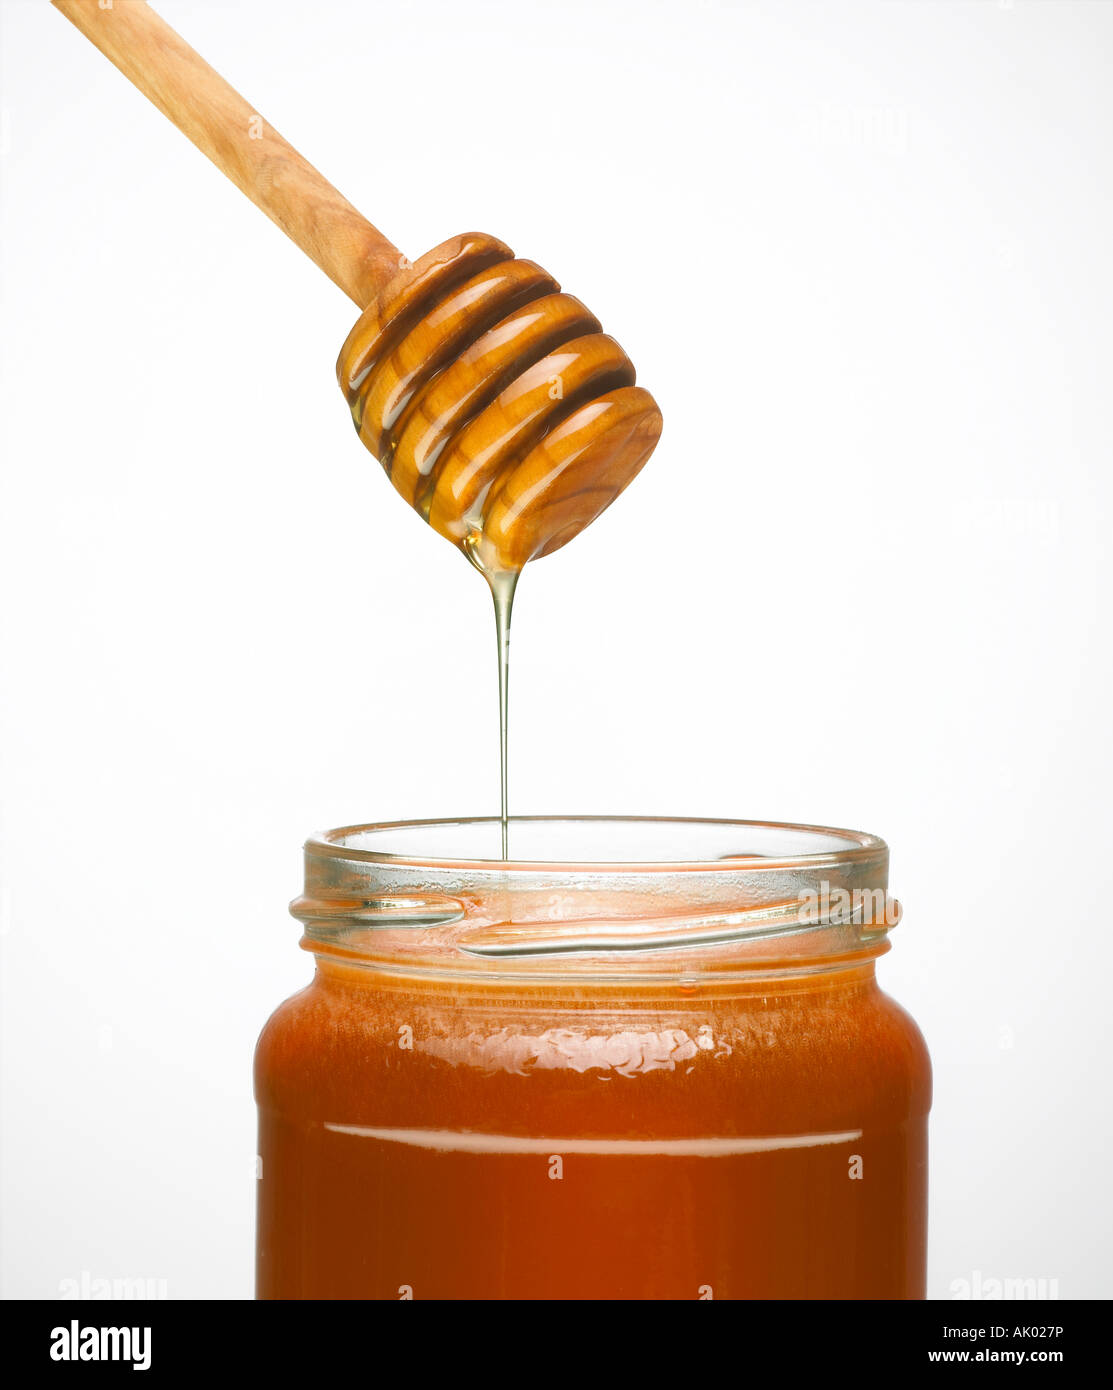 HONEY DRIPPING FROM WOODEN HONEY DRIPPER INTO GLASS JAR OF HONEY Stock Photo